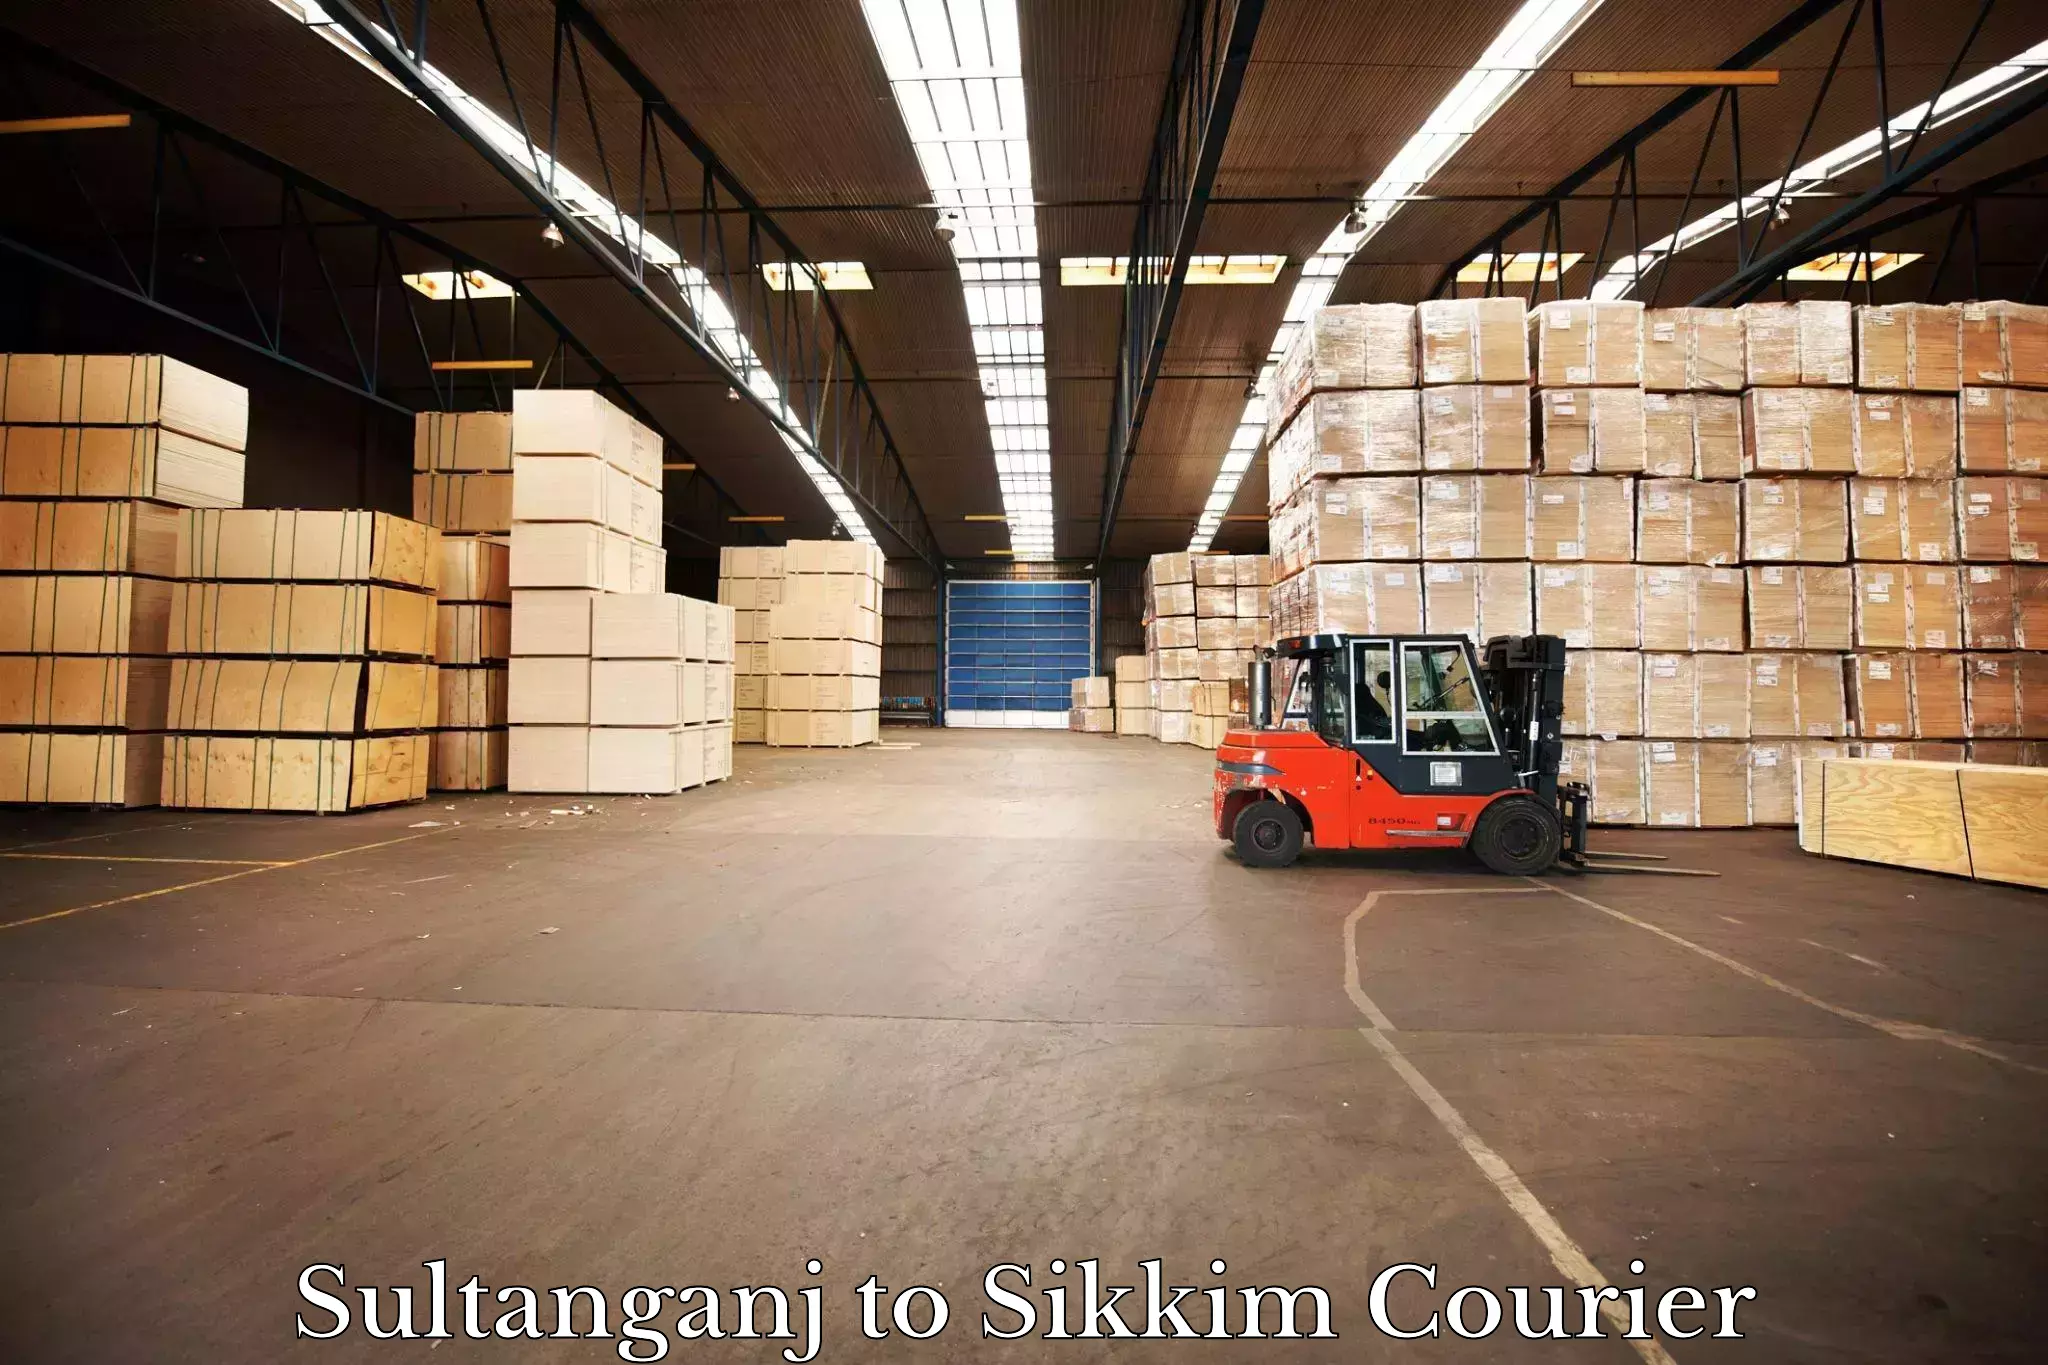 Sustainable shipping practices Sultanganj to Sikkim